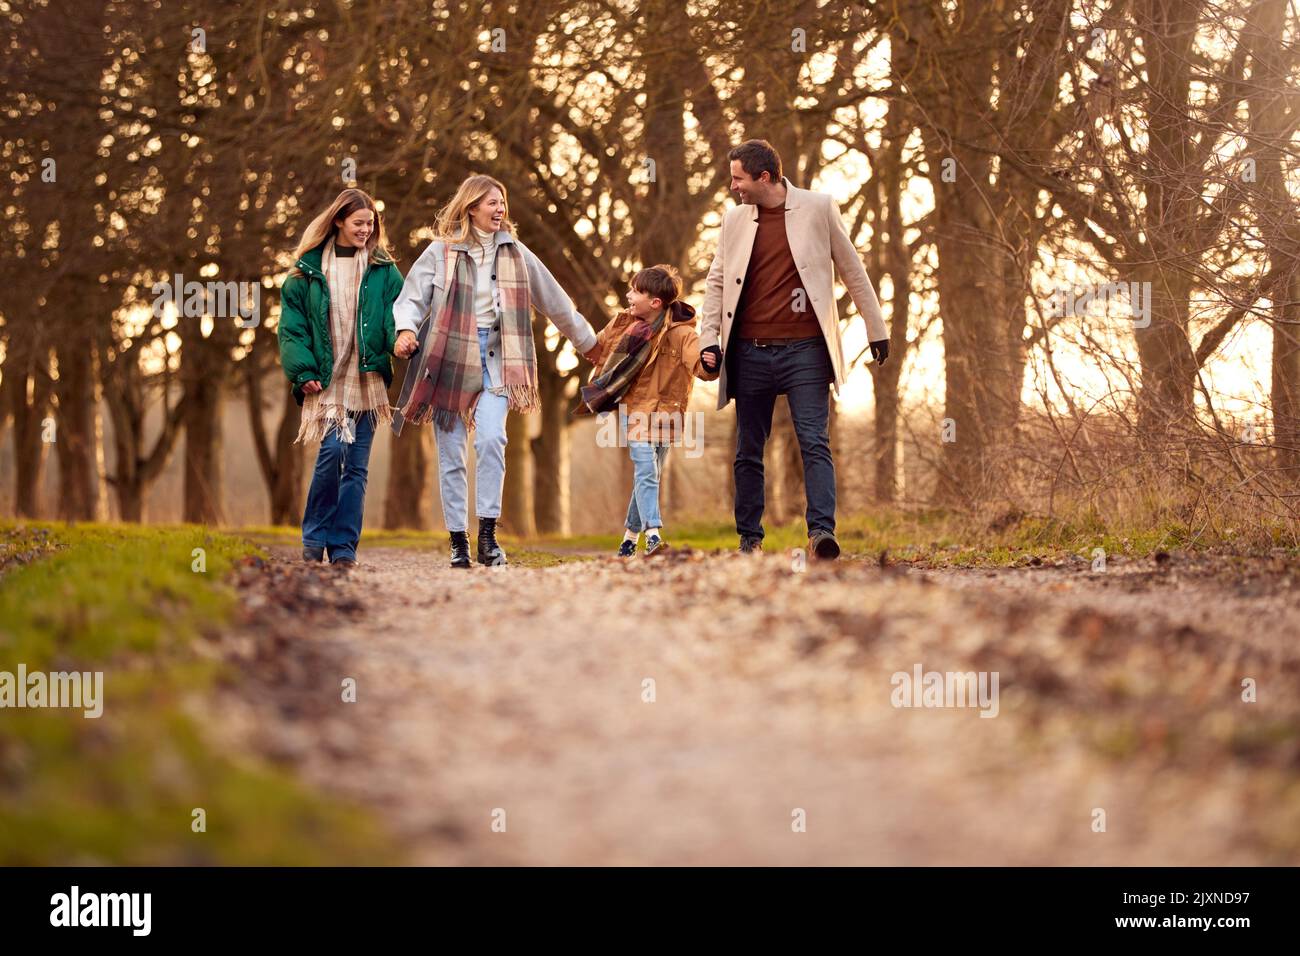 Family Holding Hands On Walk Through Autumn Countryside Together Stock Photo